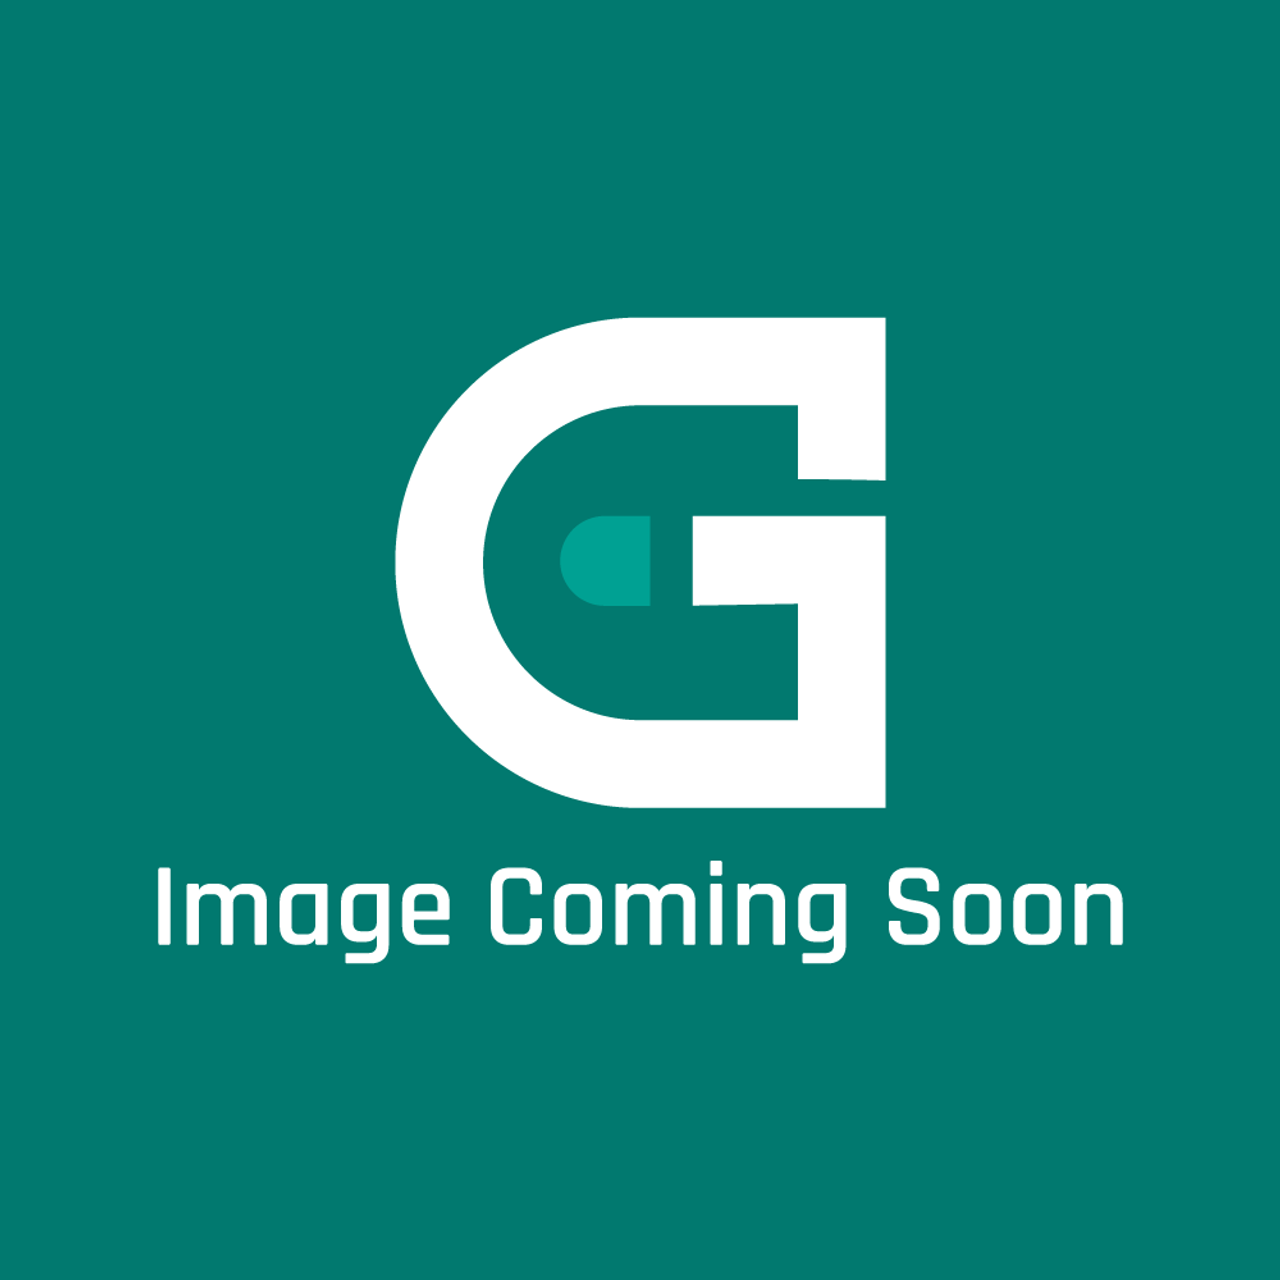 Frigidaire - Electrolux 136655101 Cover - Image Coming Soon!